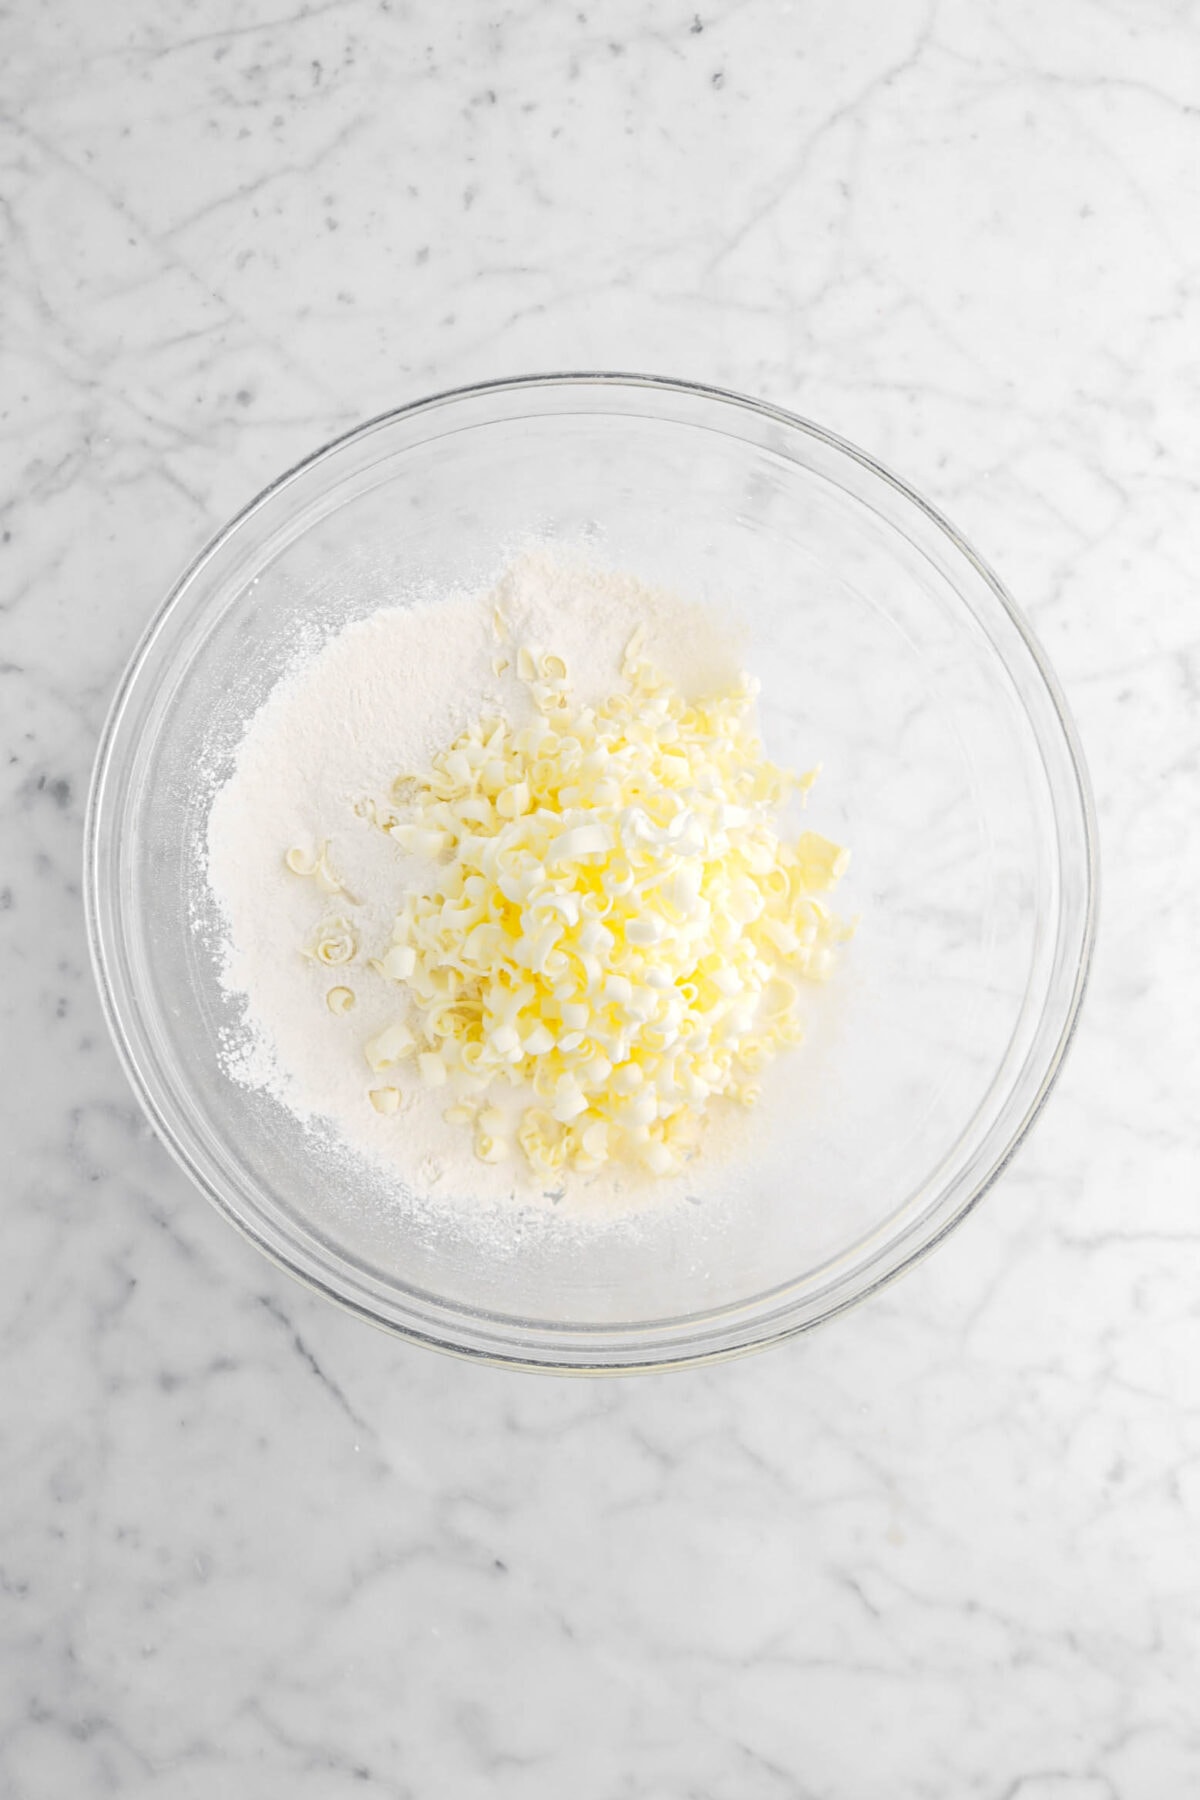 grated butter and dry ingredients in glass bowl